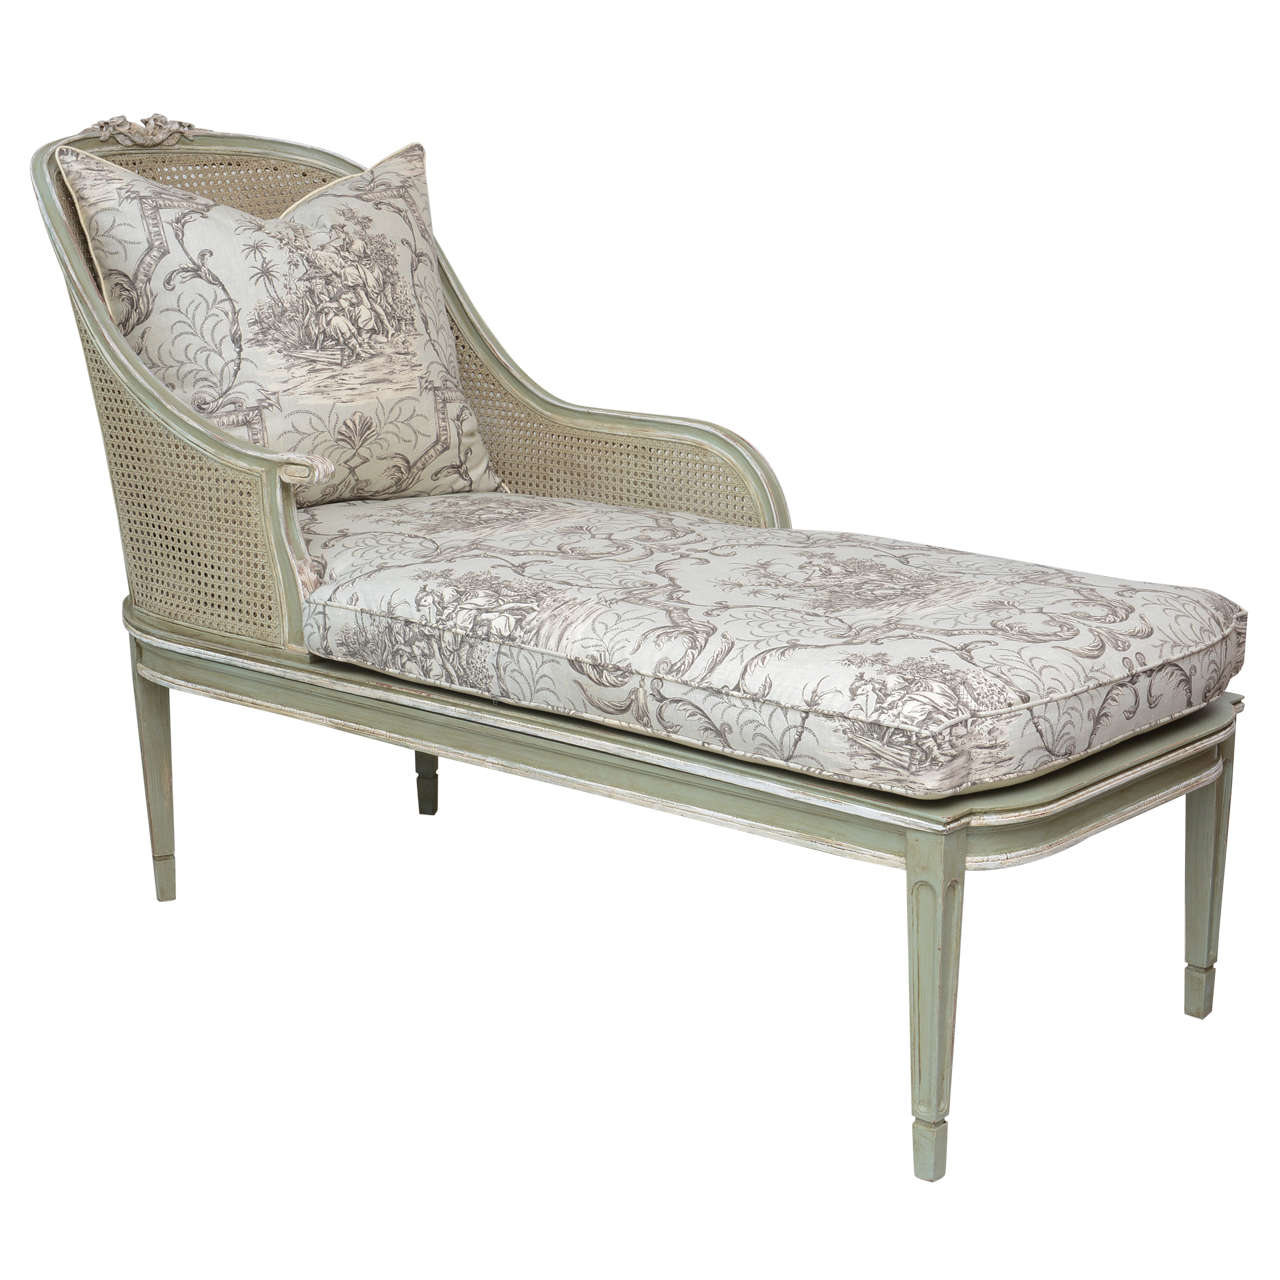 Louis XVI Style French Caned Chaise Longue